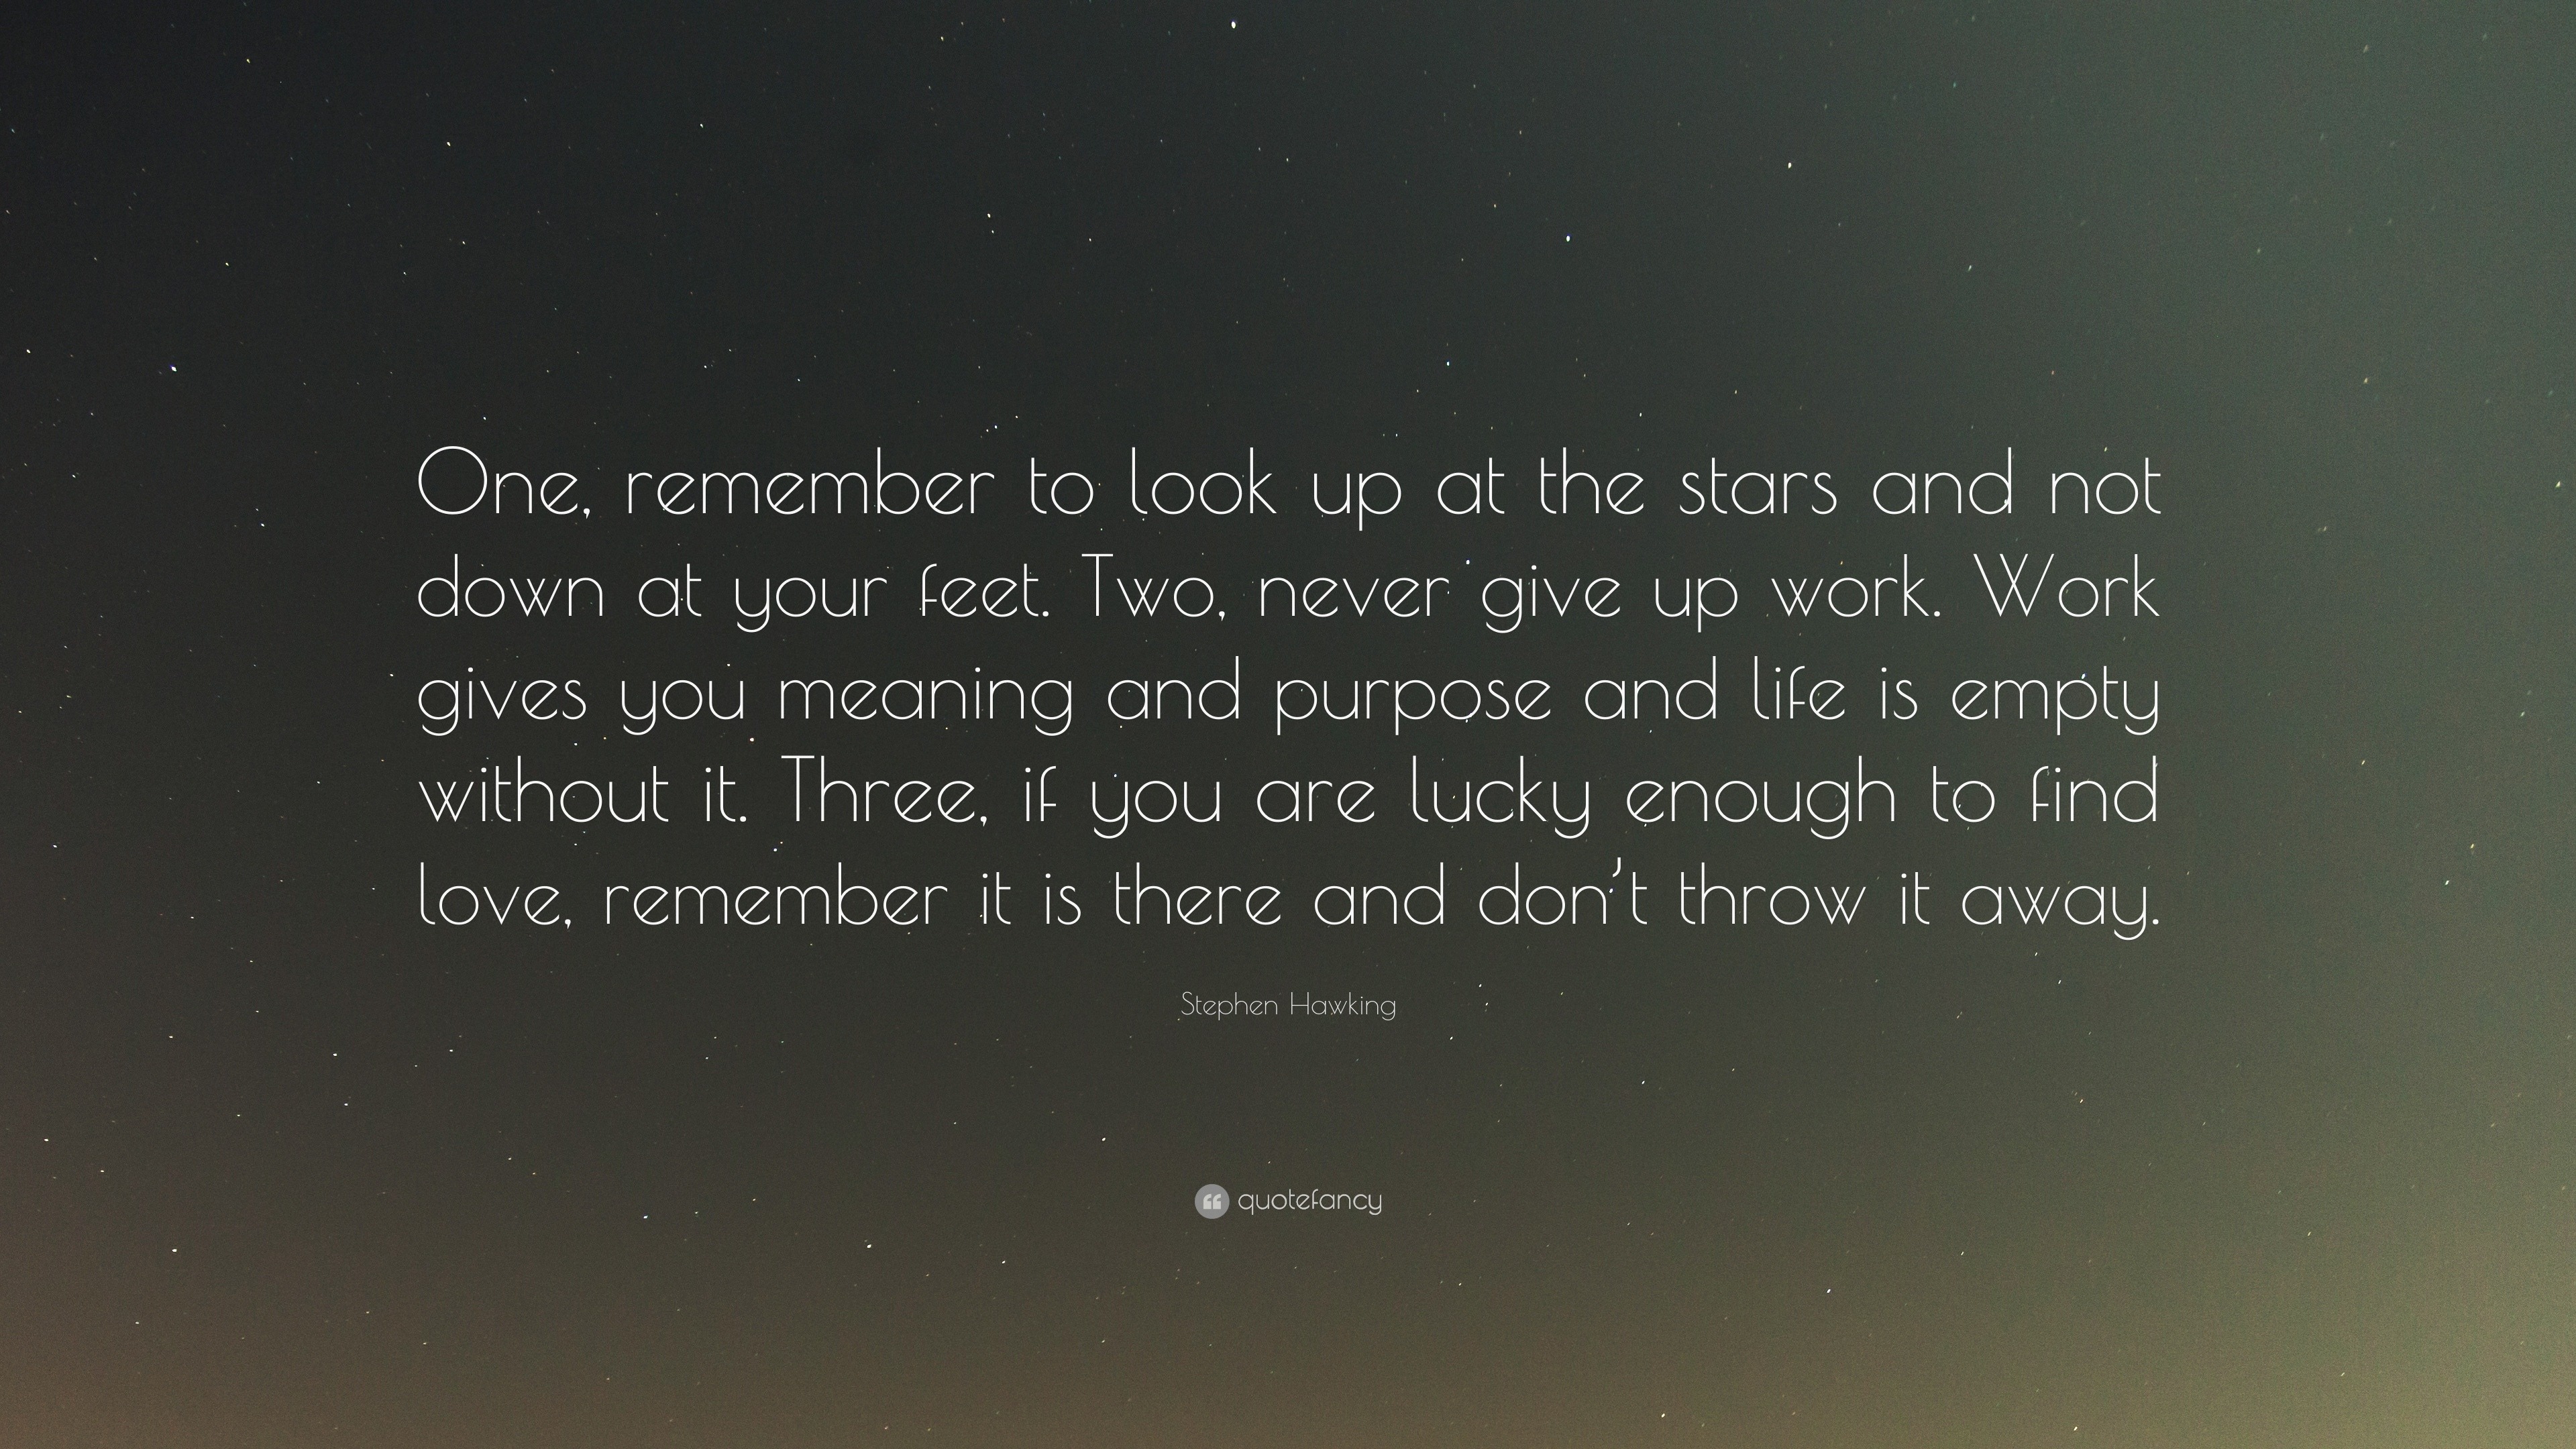 Stephen Hawking Quote “ e remember to look up at the stars and not